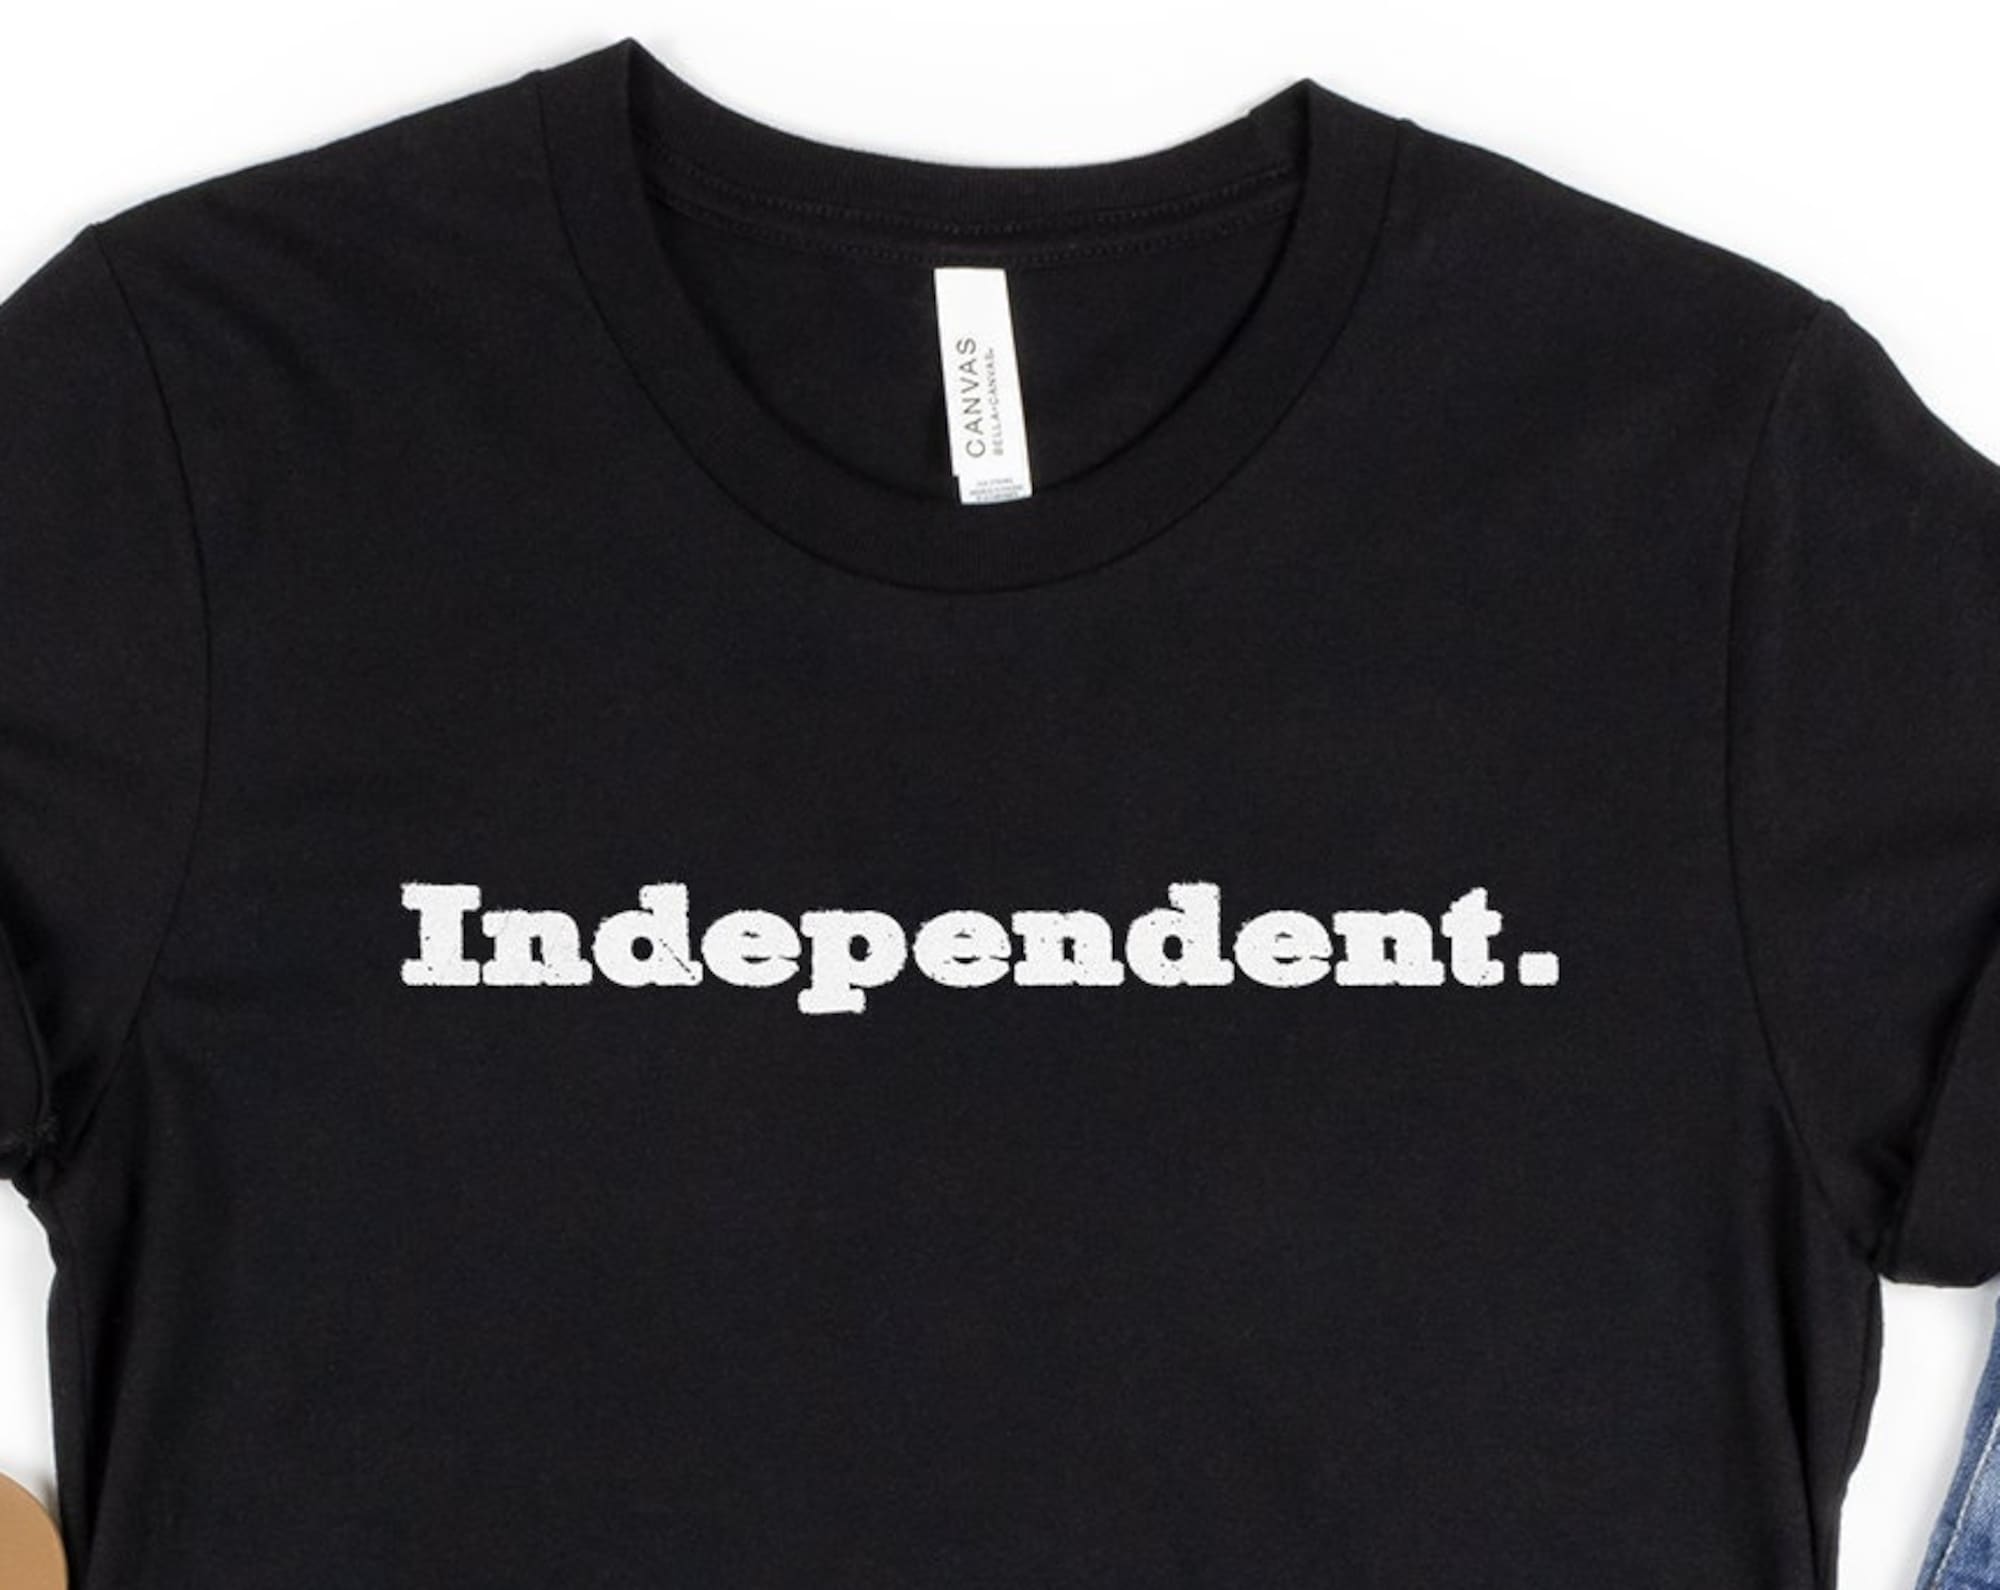 Discover Independent Tshirt, Vintage July 4th T-Shirt, Independence Day